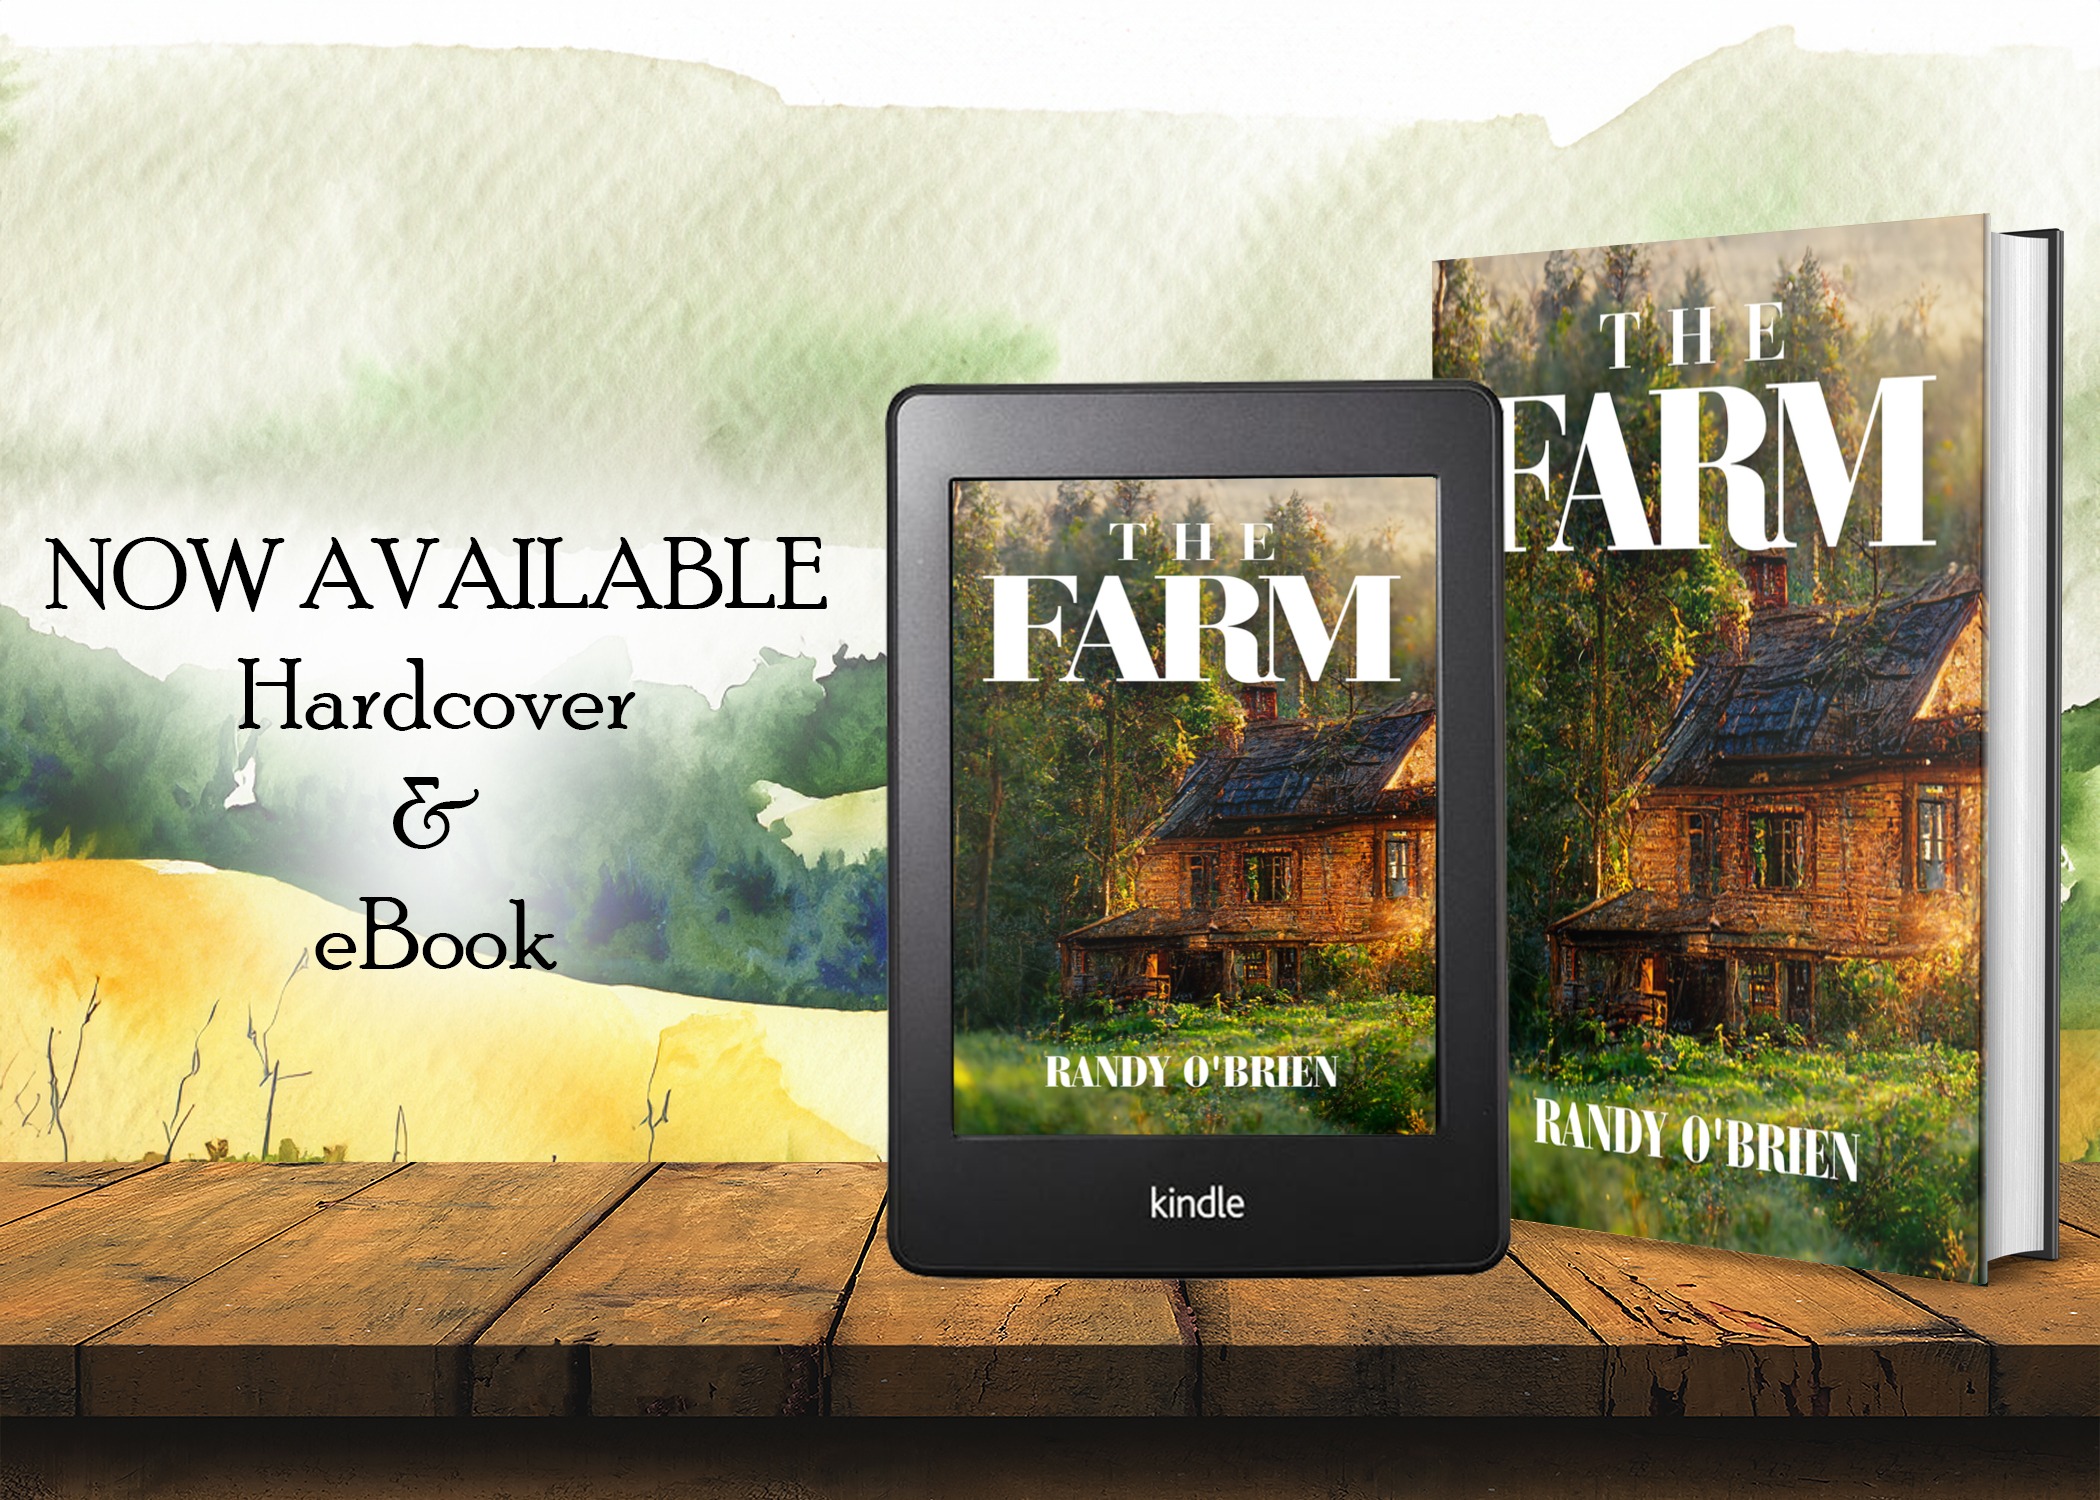 The Farm by Randy O’Brien, now available from Histria Books